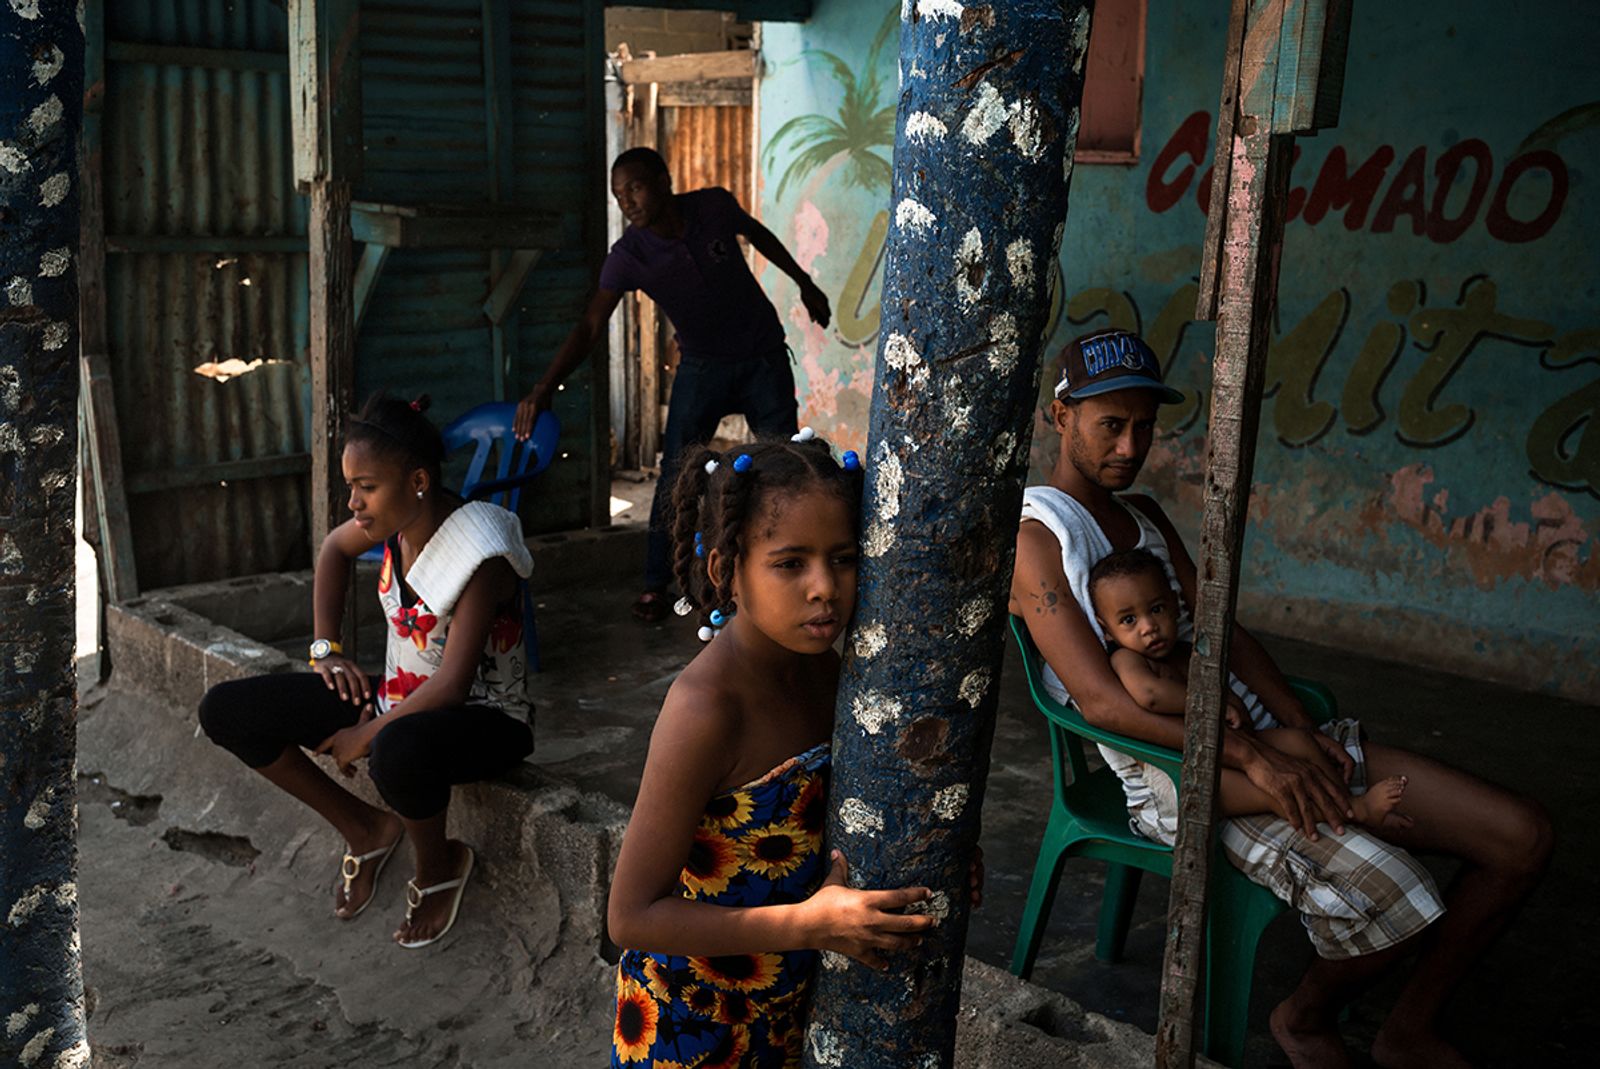 © Benjamin Petit - Image from the Climate Refugees Resettlement photography project